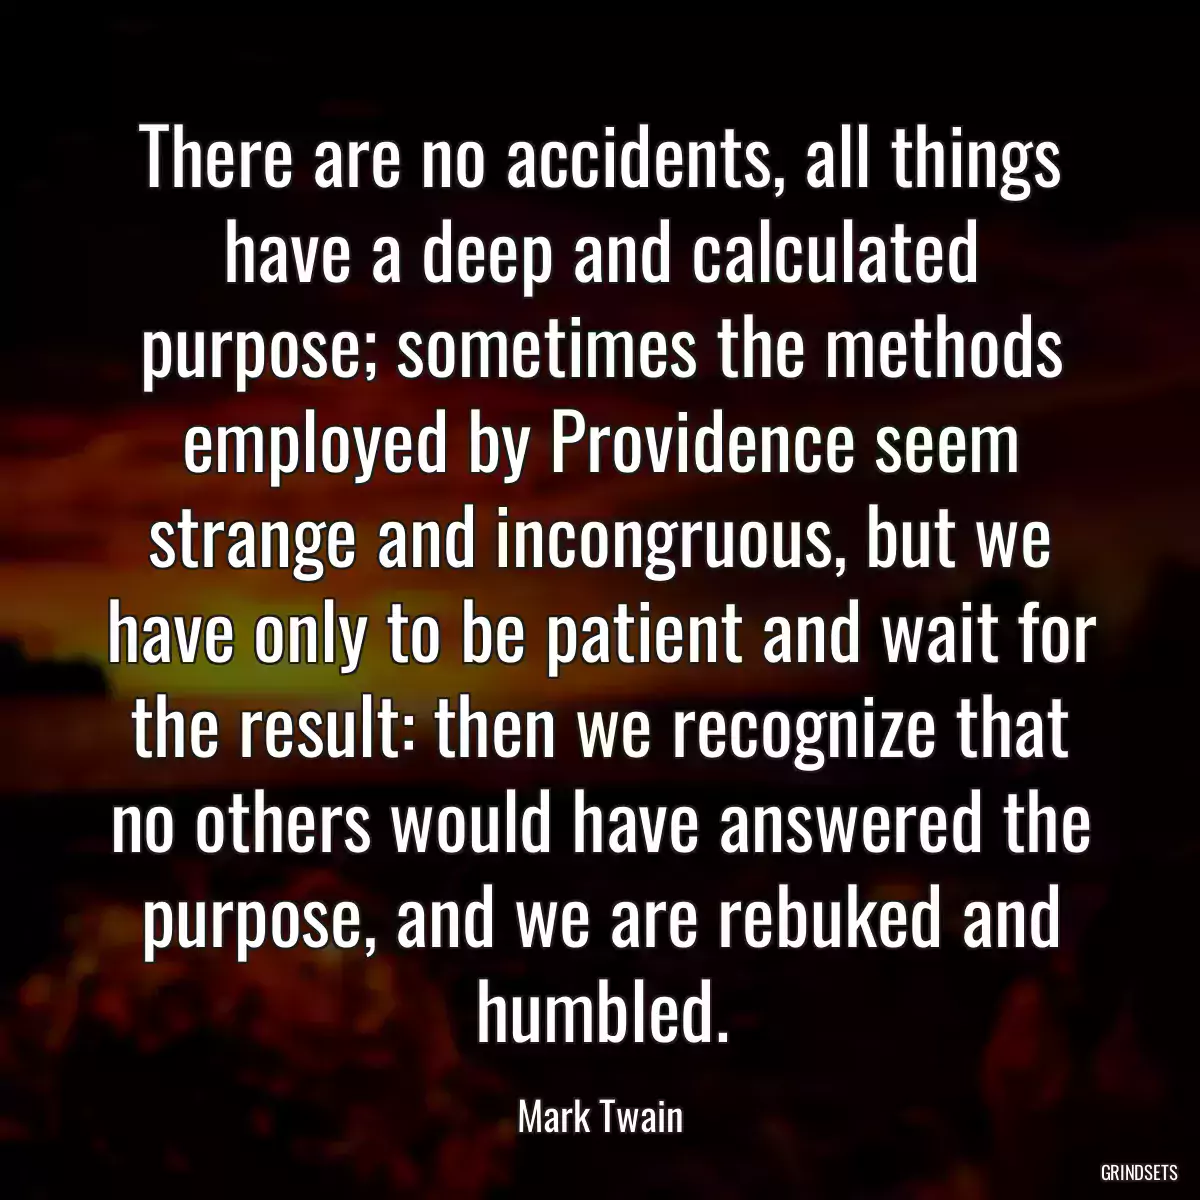 There are no accidents, all things have a deep and calculated purpose; sometimes the methods employed by Providence seem strange and incongruous, but we have only to be patient and wait for the result: then we recognize that no others would have answered the purpose, and we are rebuked and humbled.